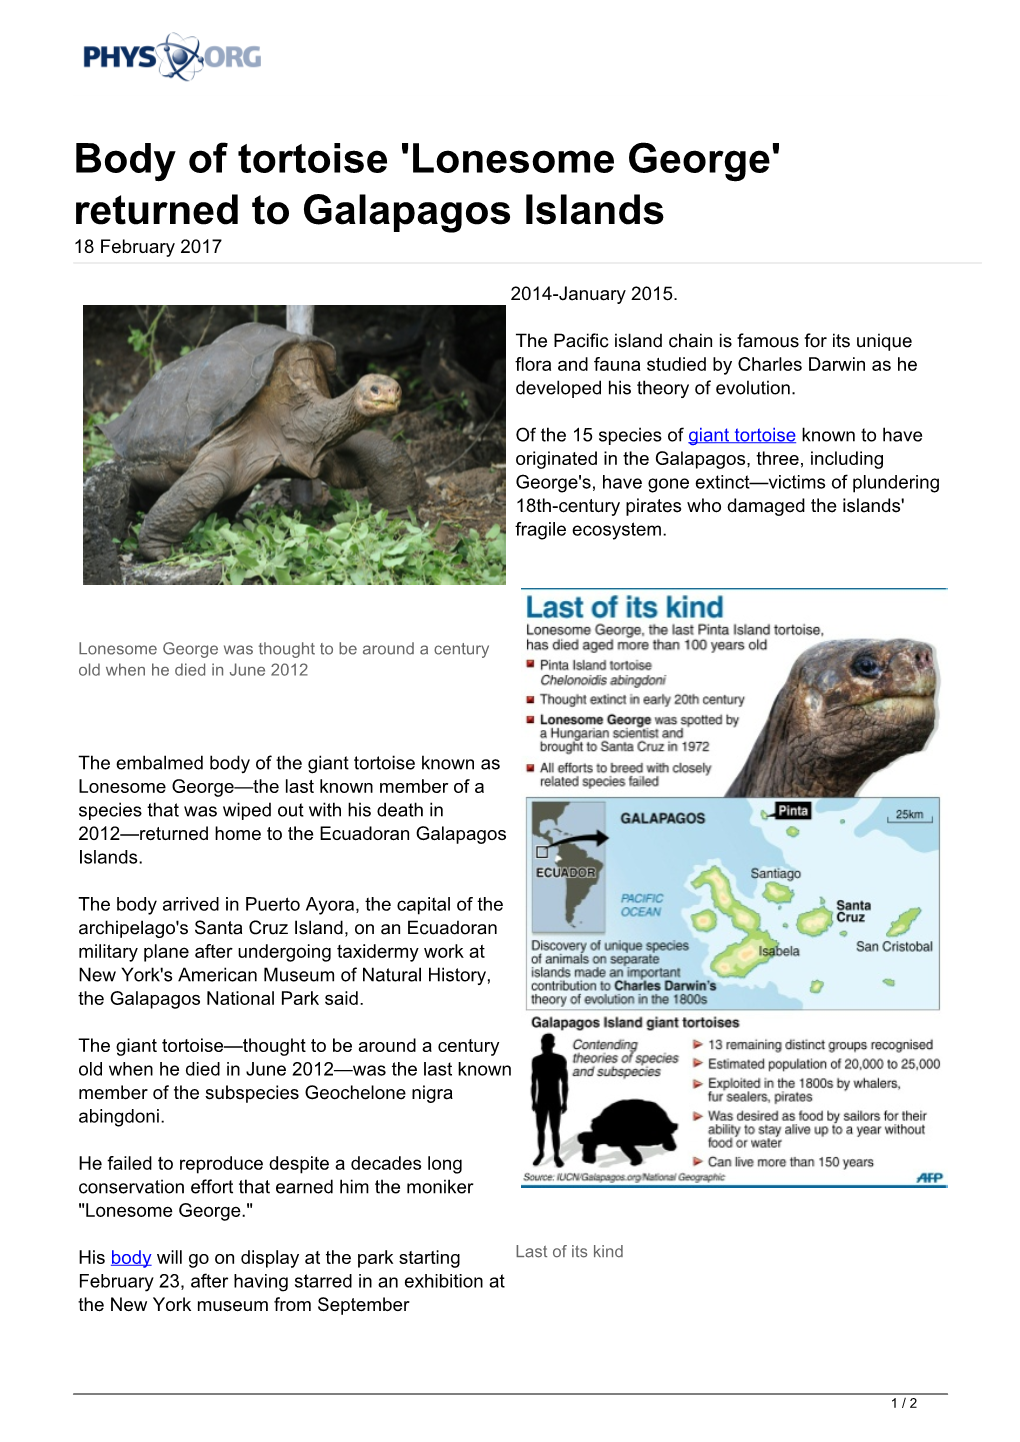 Lonesome George' Returned to Galapagos Islands 18 February 2017